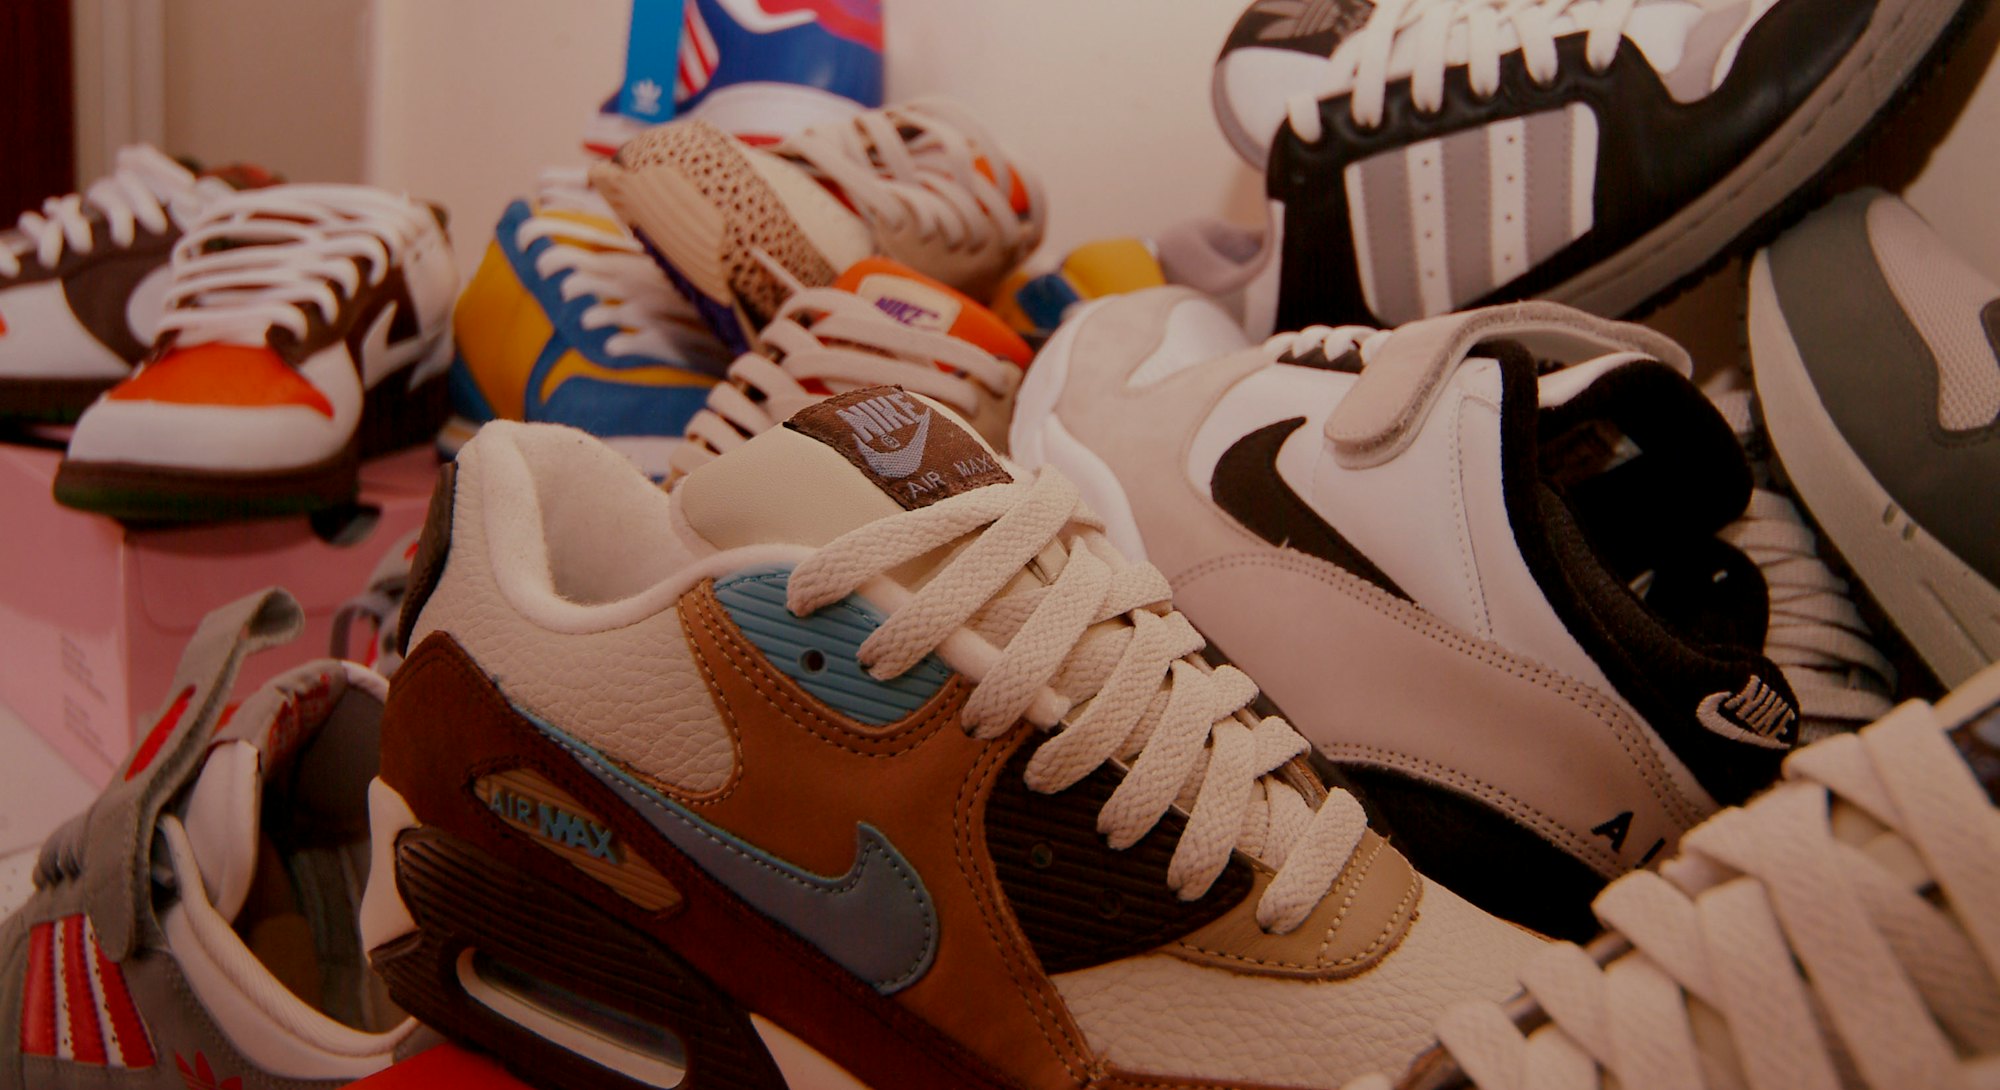 Trainer collection, Nike, Adidas, London, UK 2005. (Photo by: PYMCA/Universal Images Group via Getty...